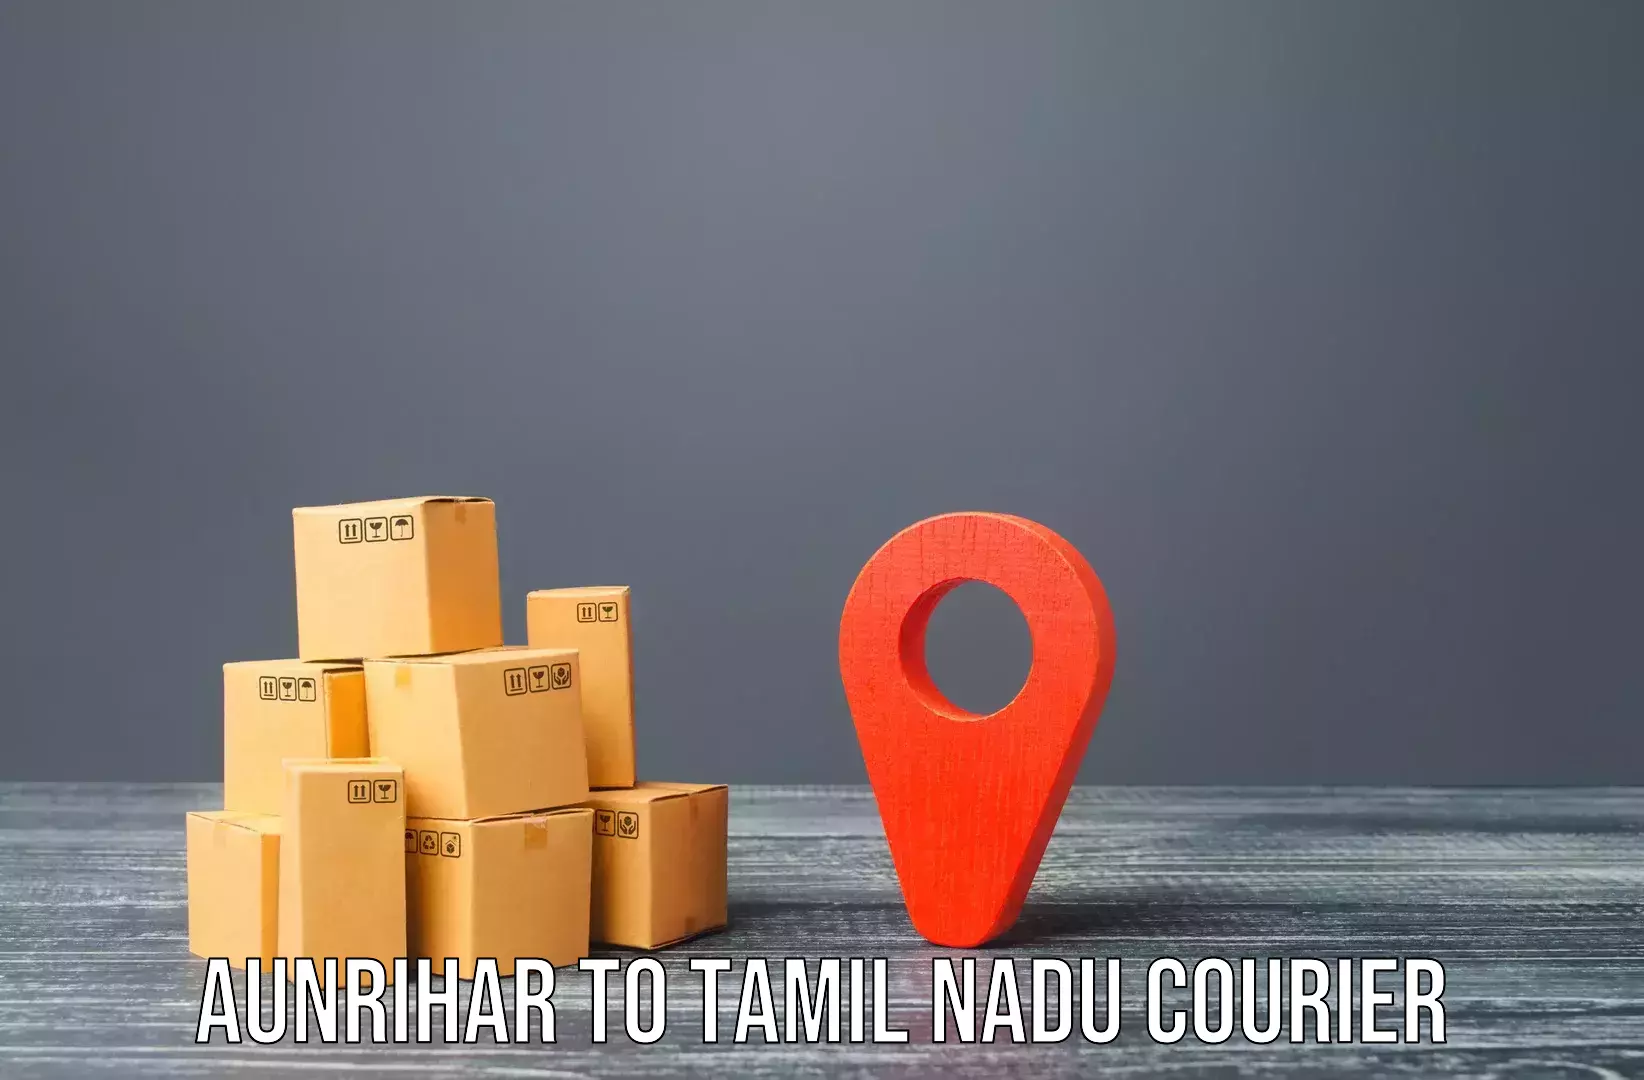 Quality relocation assistance in Aunrihar to Kovilpatti